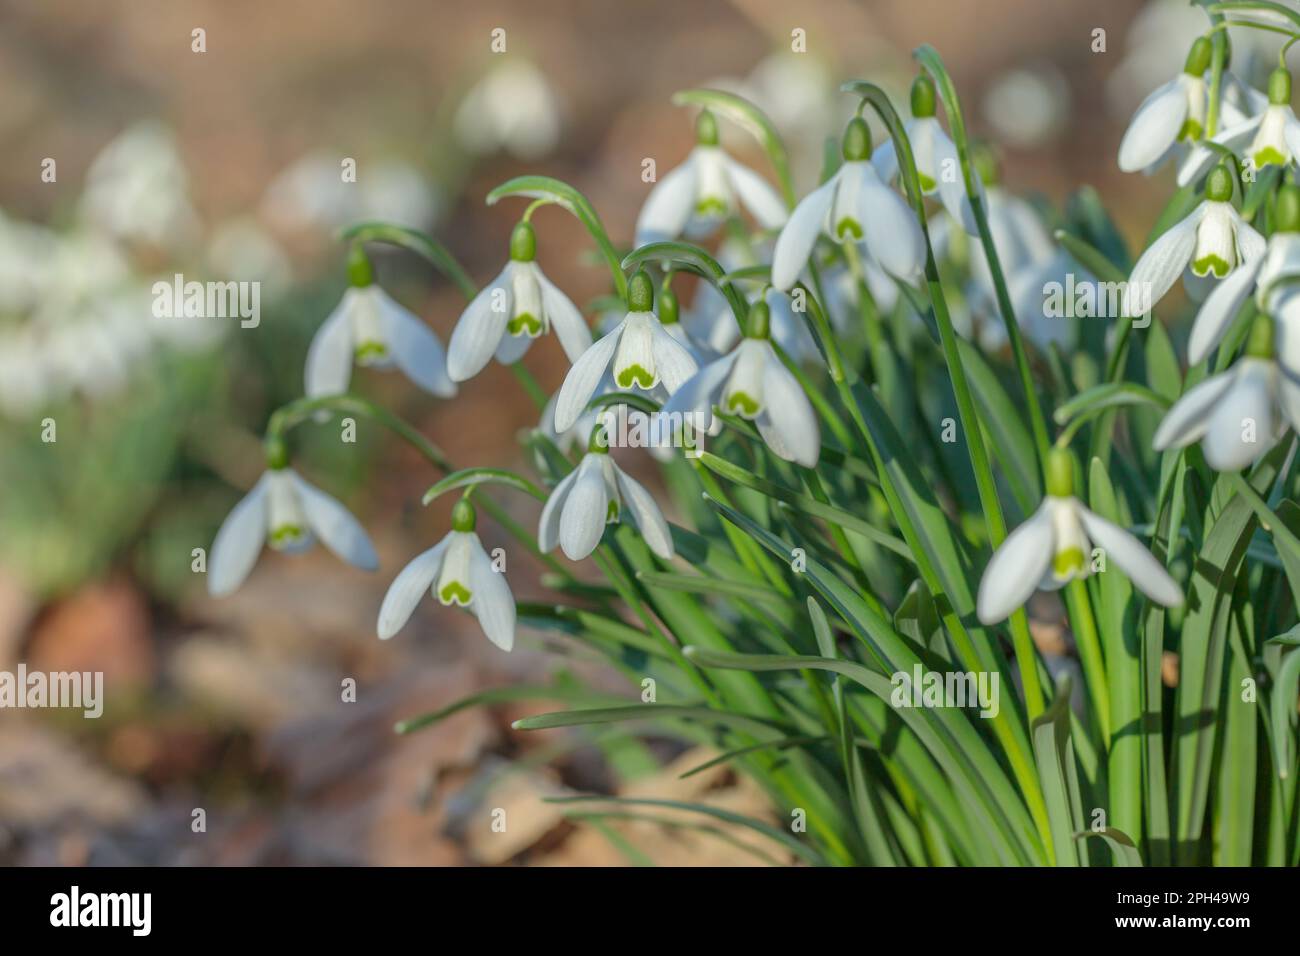 Group of wild growing snowdrops (Galanthus nivalis). Stock Photo